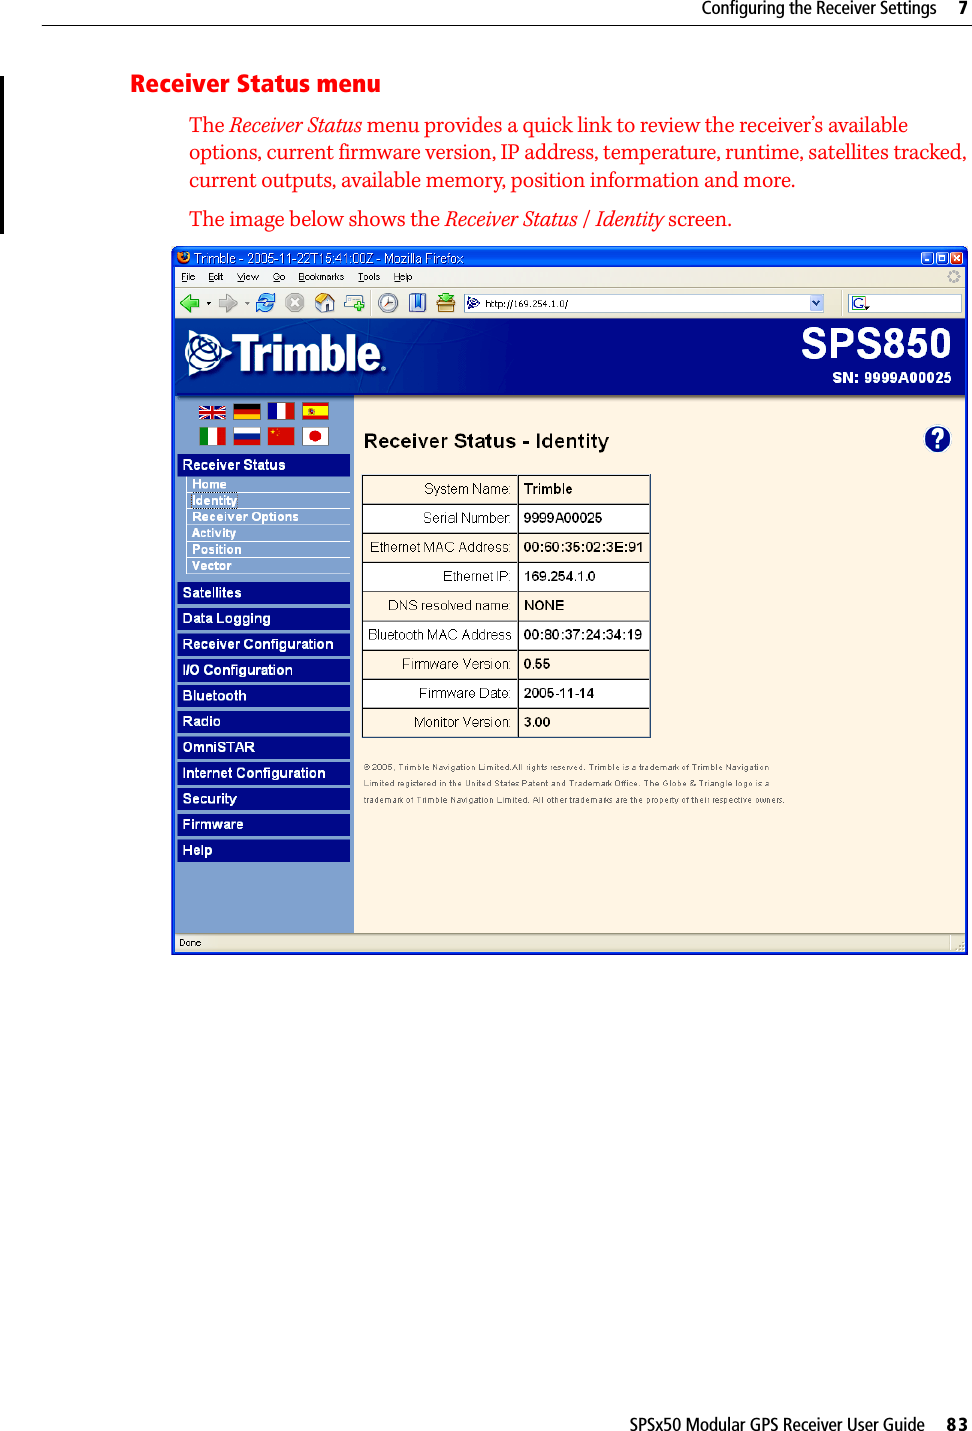 SPSx50 Modular GPS Receiver User Guide     83Configuring the Receiver Settings     7Receiver Status menuThe Receiver Status menu provides a quick link to review the receiver’s available options, current firmware version, IP address, temperature, runtime, satellites tracked, current outputs, available memory, position information and more.The image below shows the Receiver Status / Identity screen.  